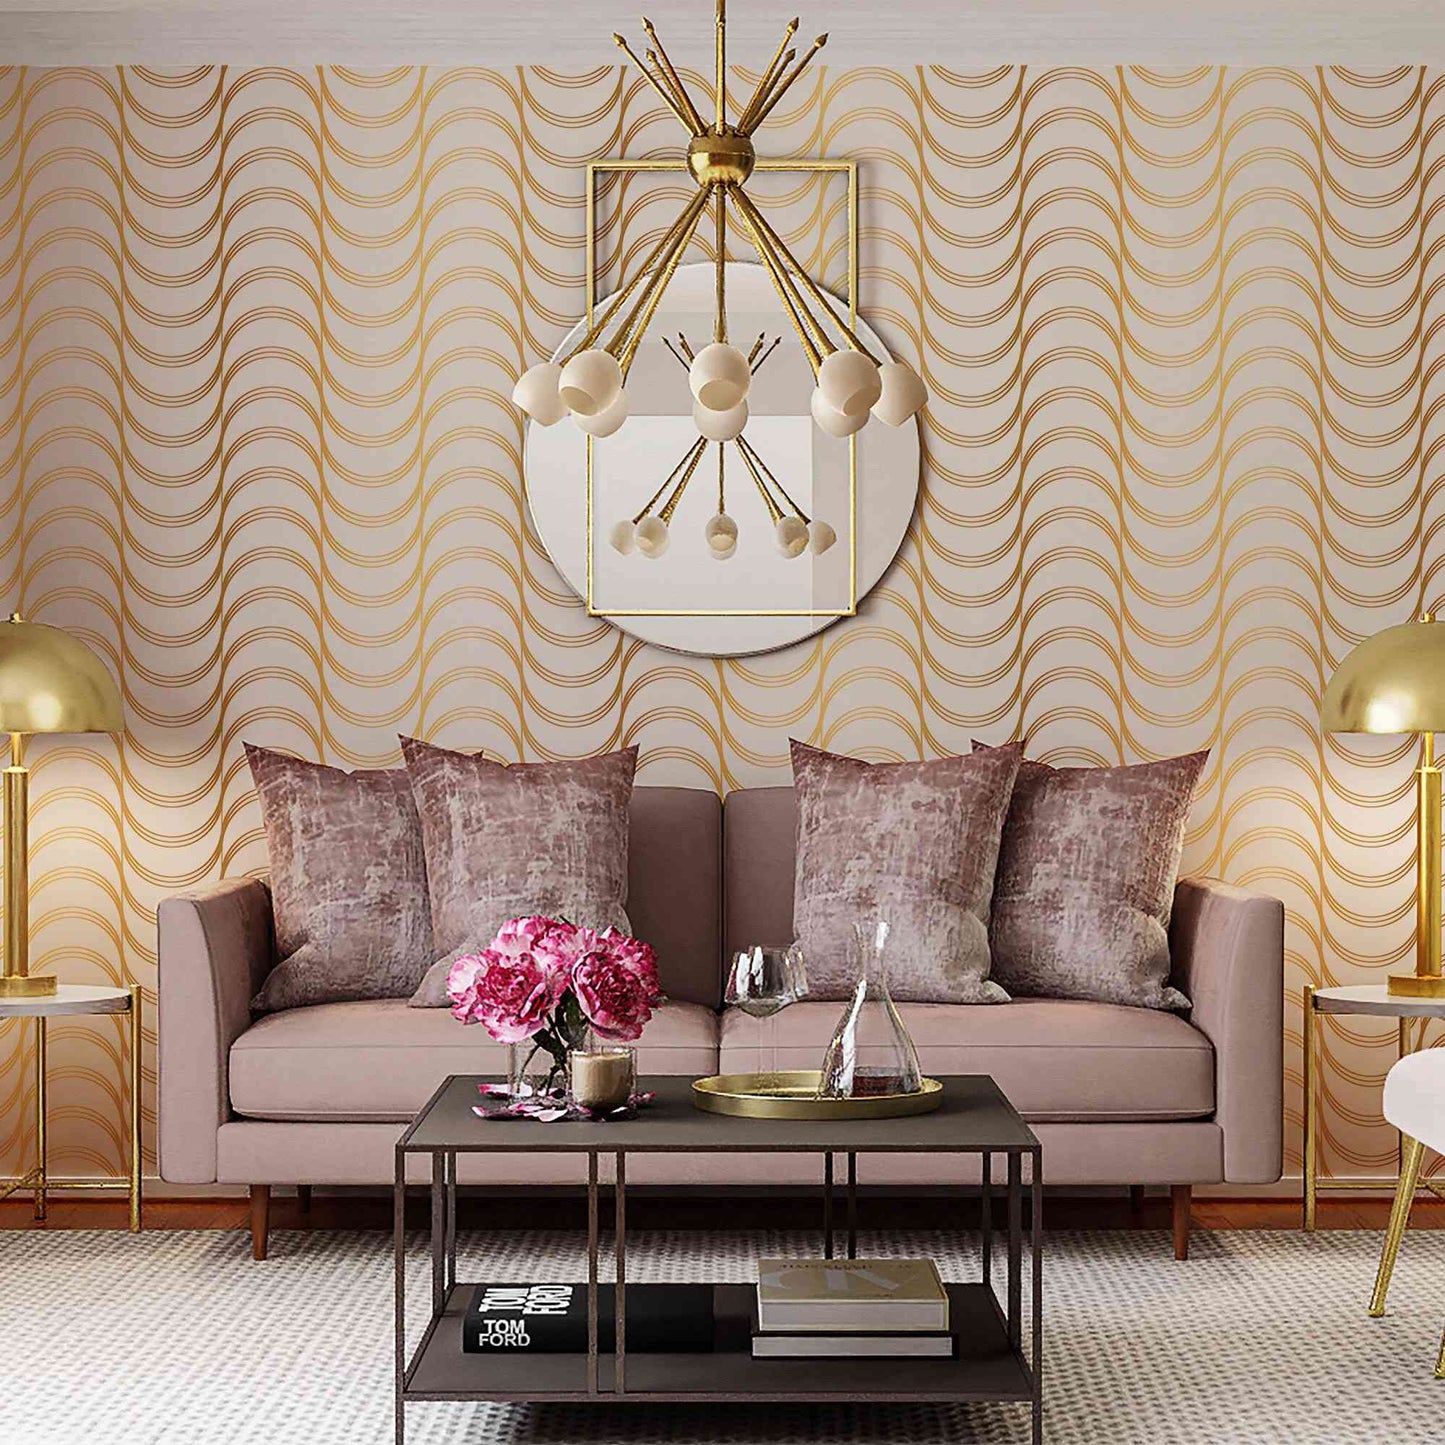 Peel and stick wallpaper with a stunning gold pattern mural, adding a touch of luxury.